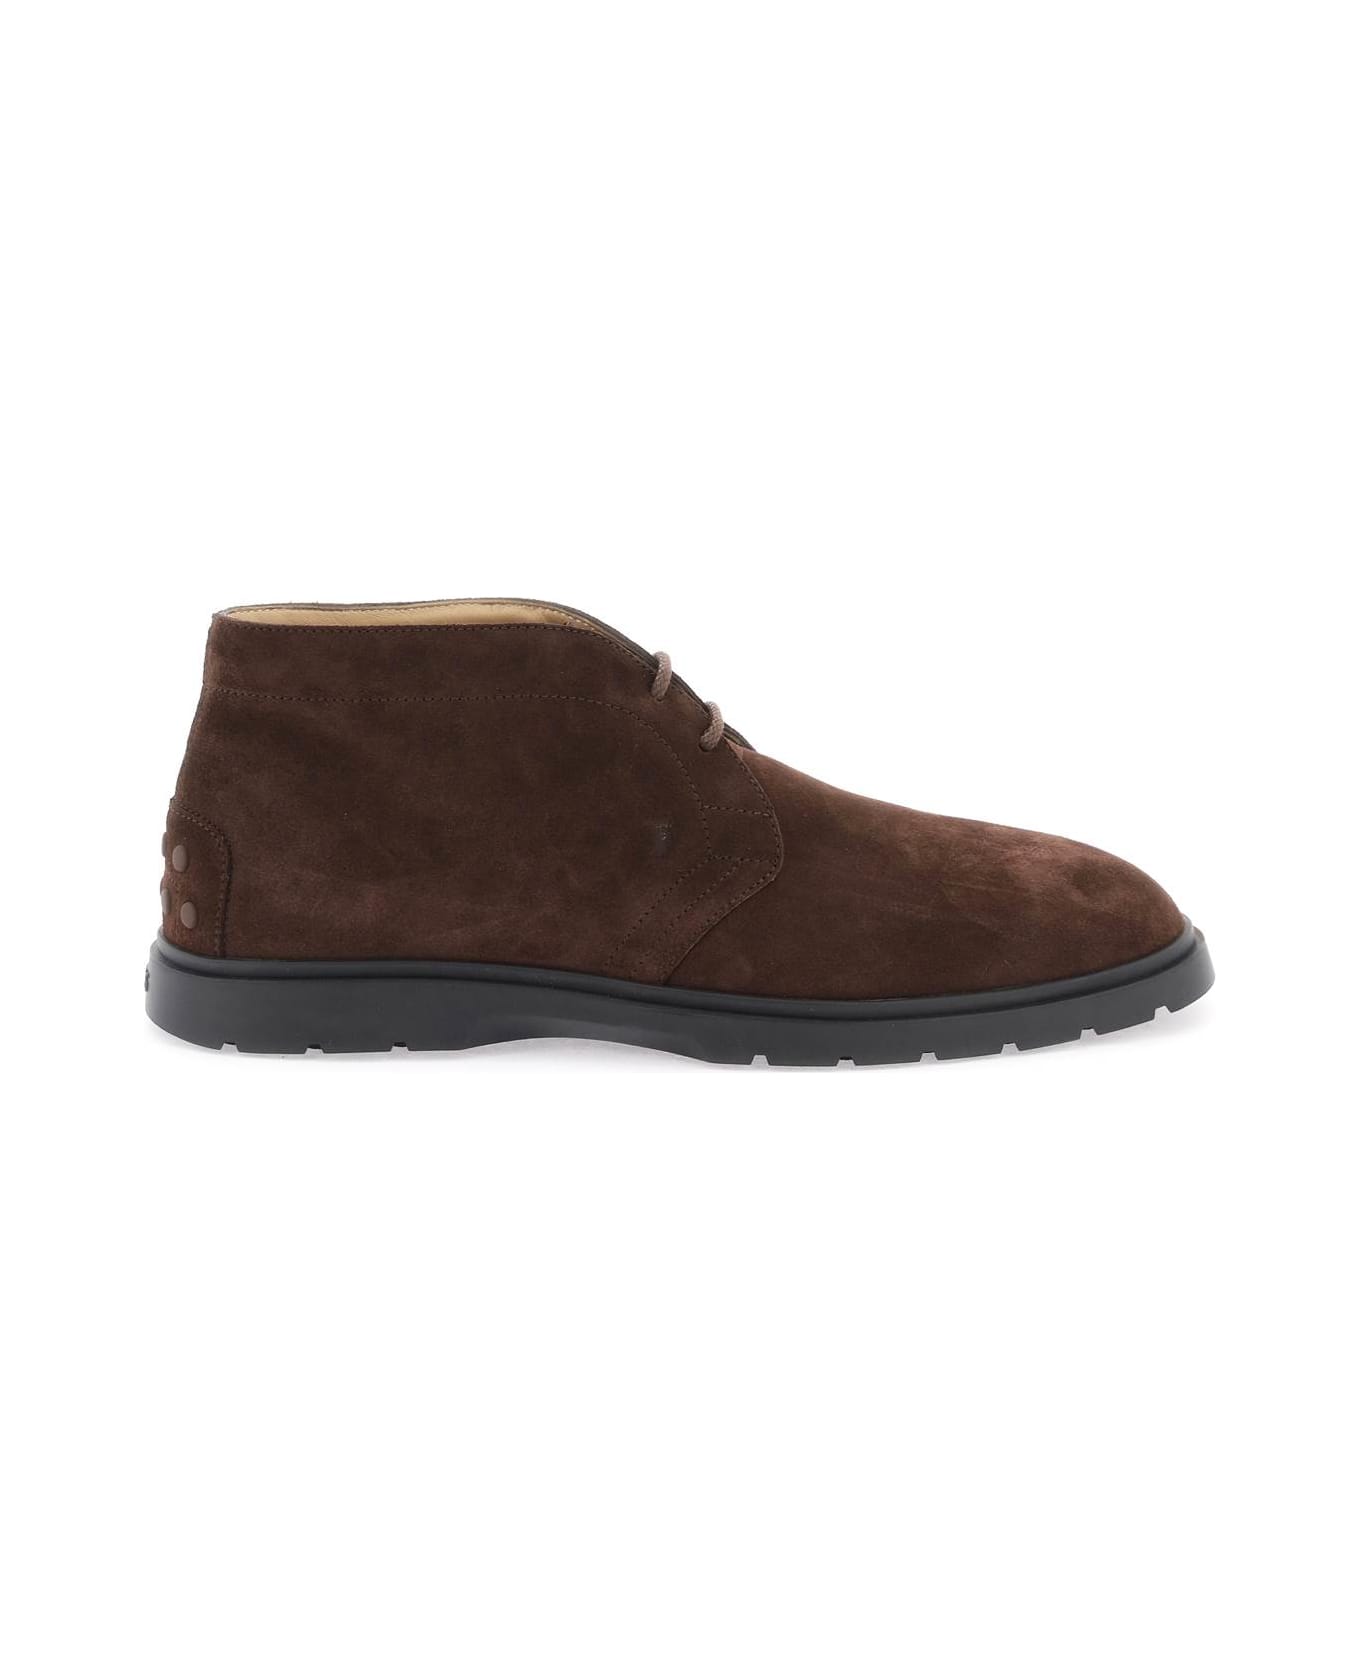 Tod's Suede Leather Ankle Boots - brown ブーツ